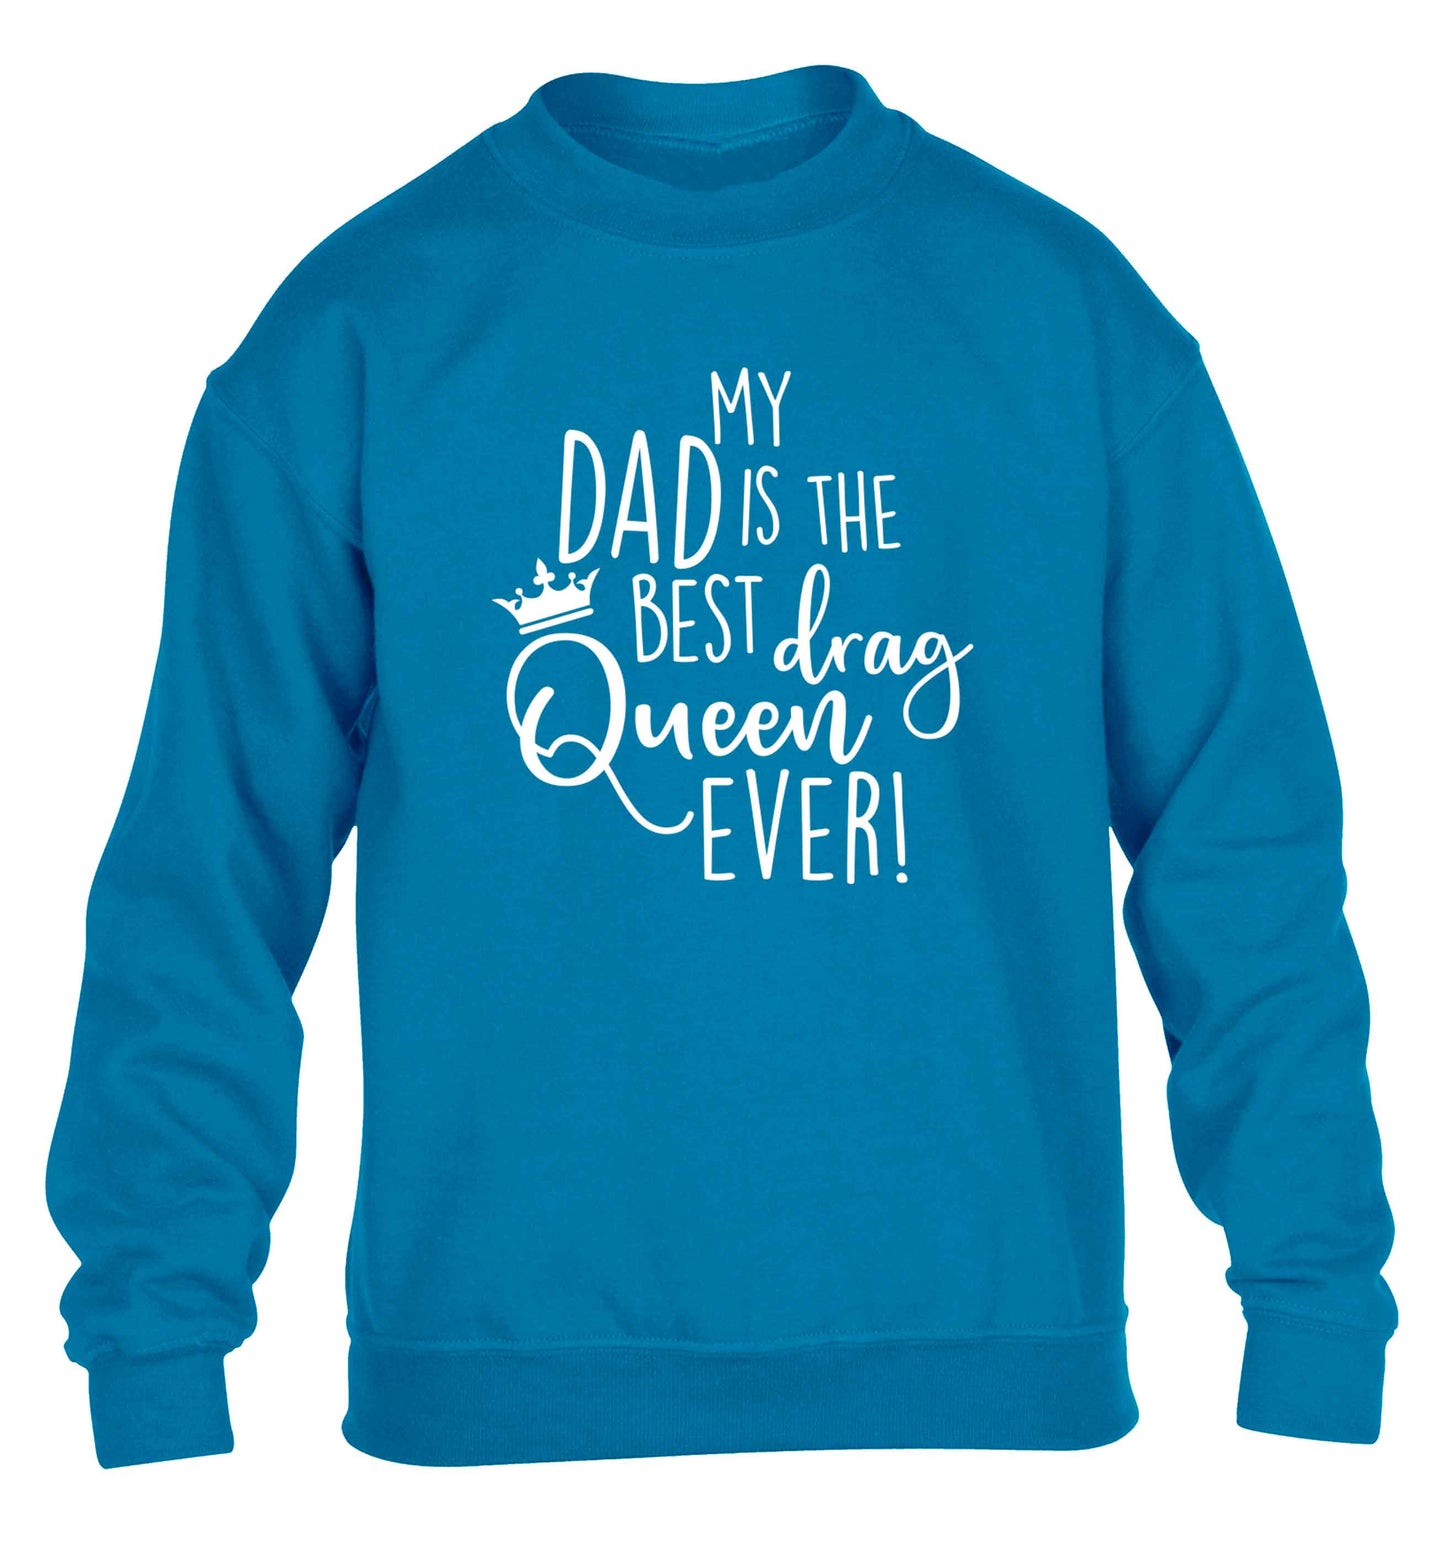 My dad is the best drag Queen ever children's blue sweater 12-13 Years